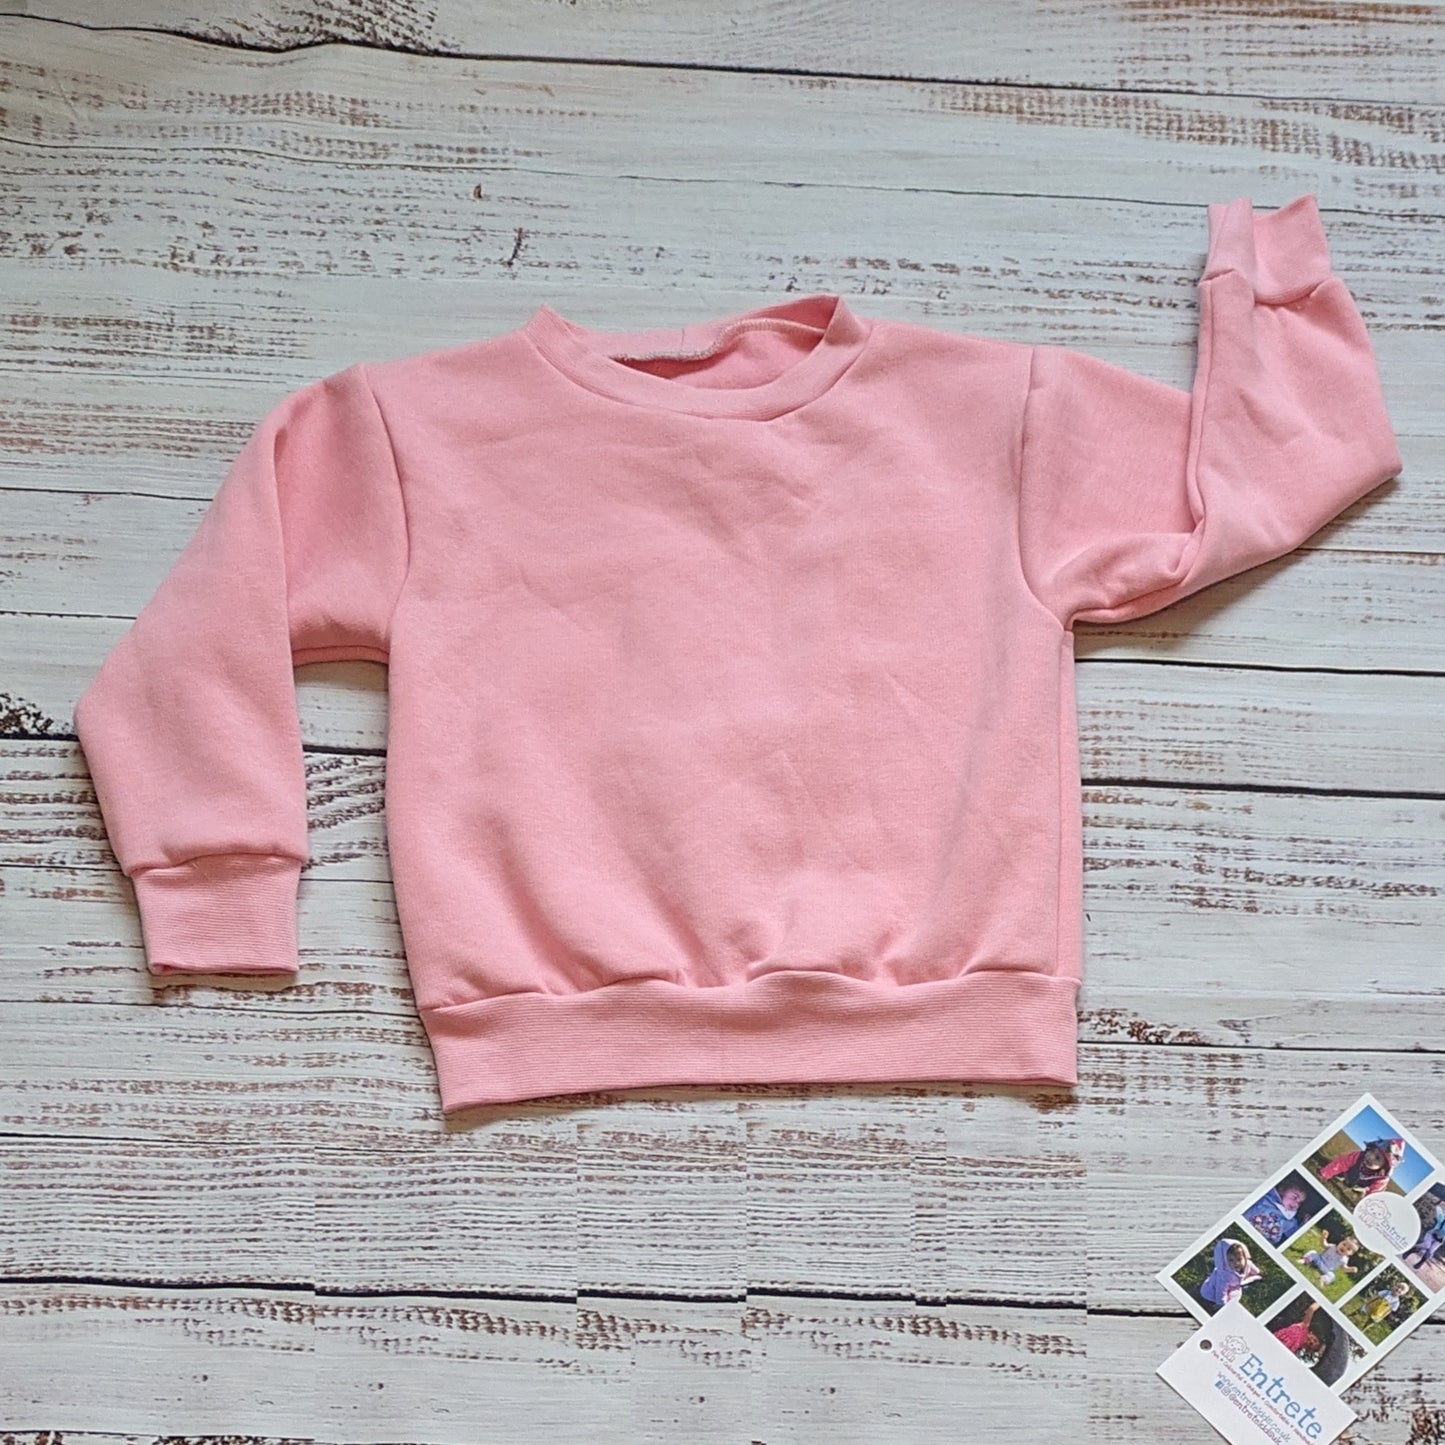 Pink checked happy flowers heart sweatshirt. Handmade in your colour choice of cotton French terry, with matching cotton ribbing and fun pink checked smiling flowers heart detailing on the back. Shown in pink French terry from the front.